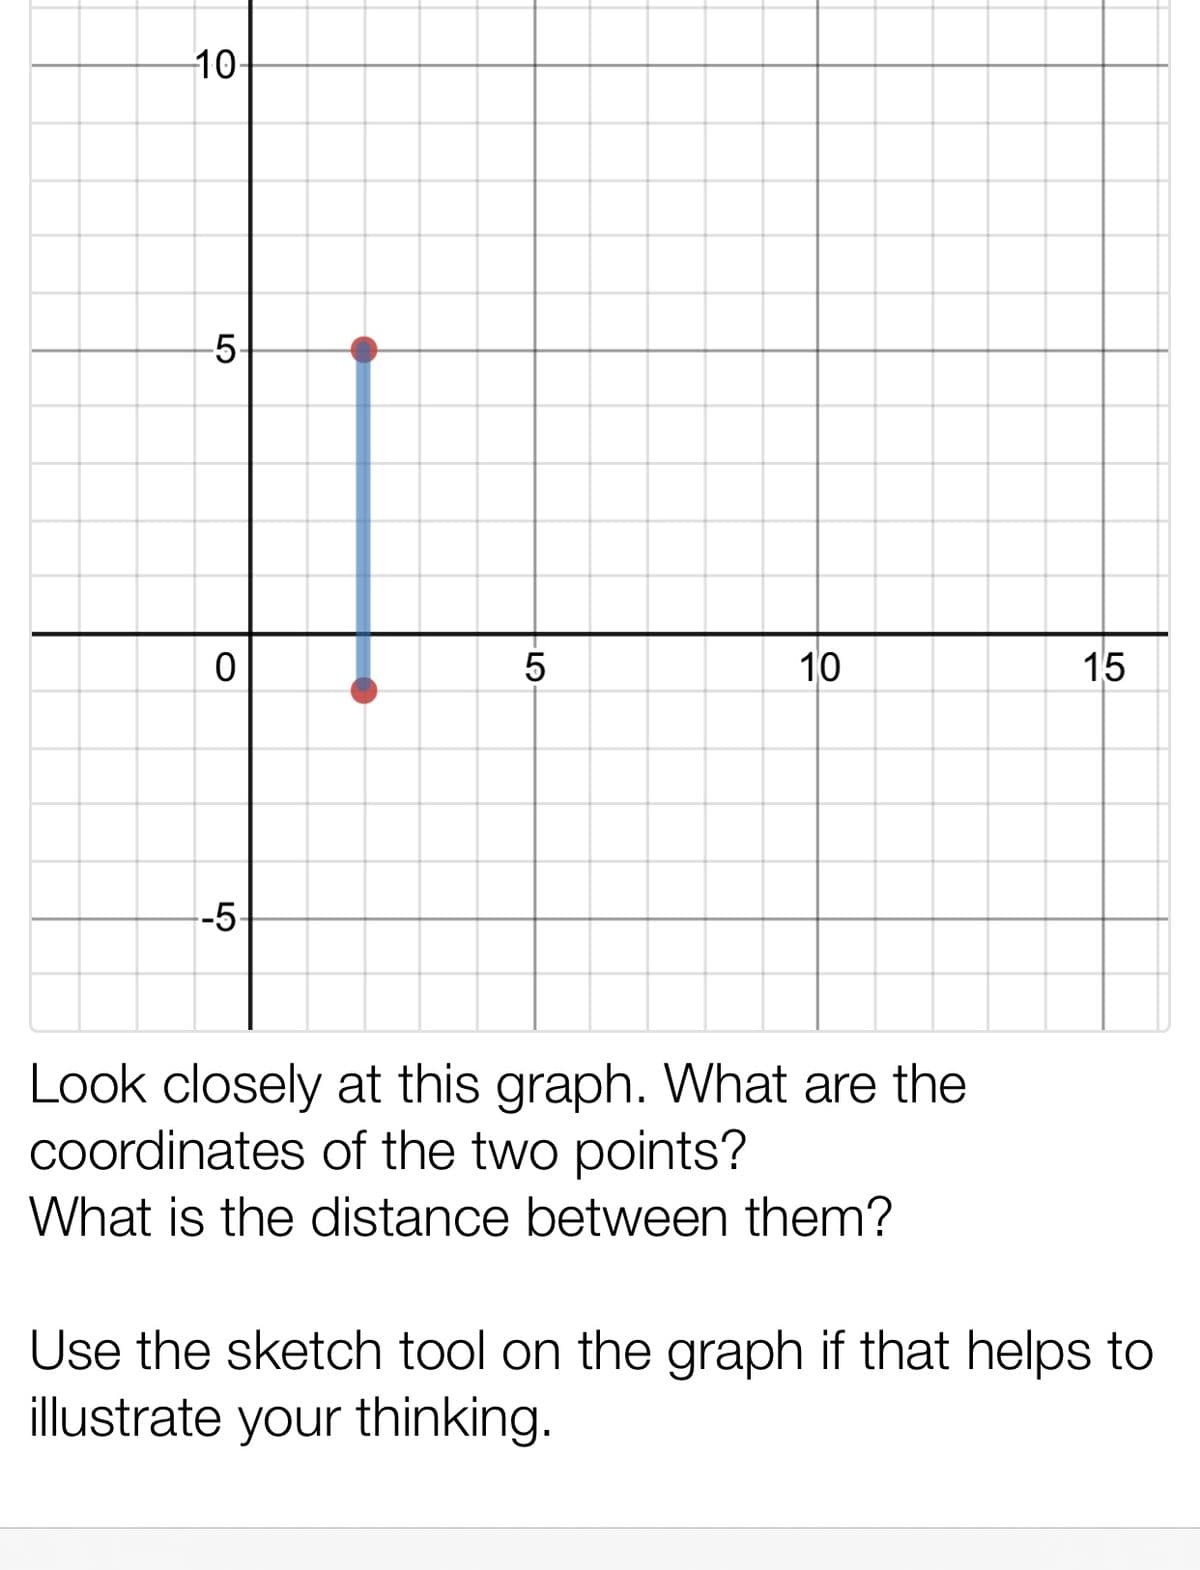 10-
5-
5
10
15
-5-
Look closely at this graph. What are the
Coordinates of the two points?
What is the distance between them?
Use the sketch tool on the graph if that helps to
illustrate your thinking.
LO
